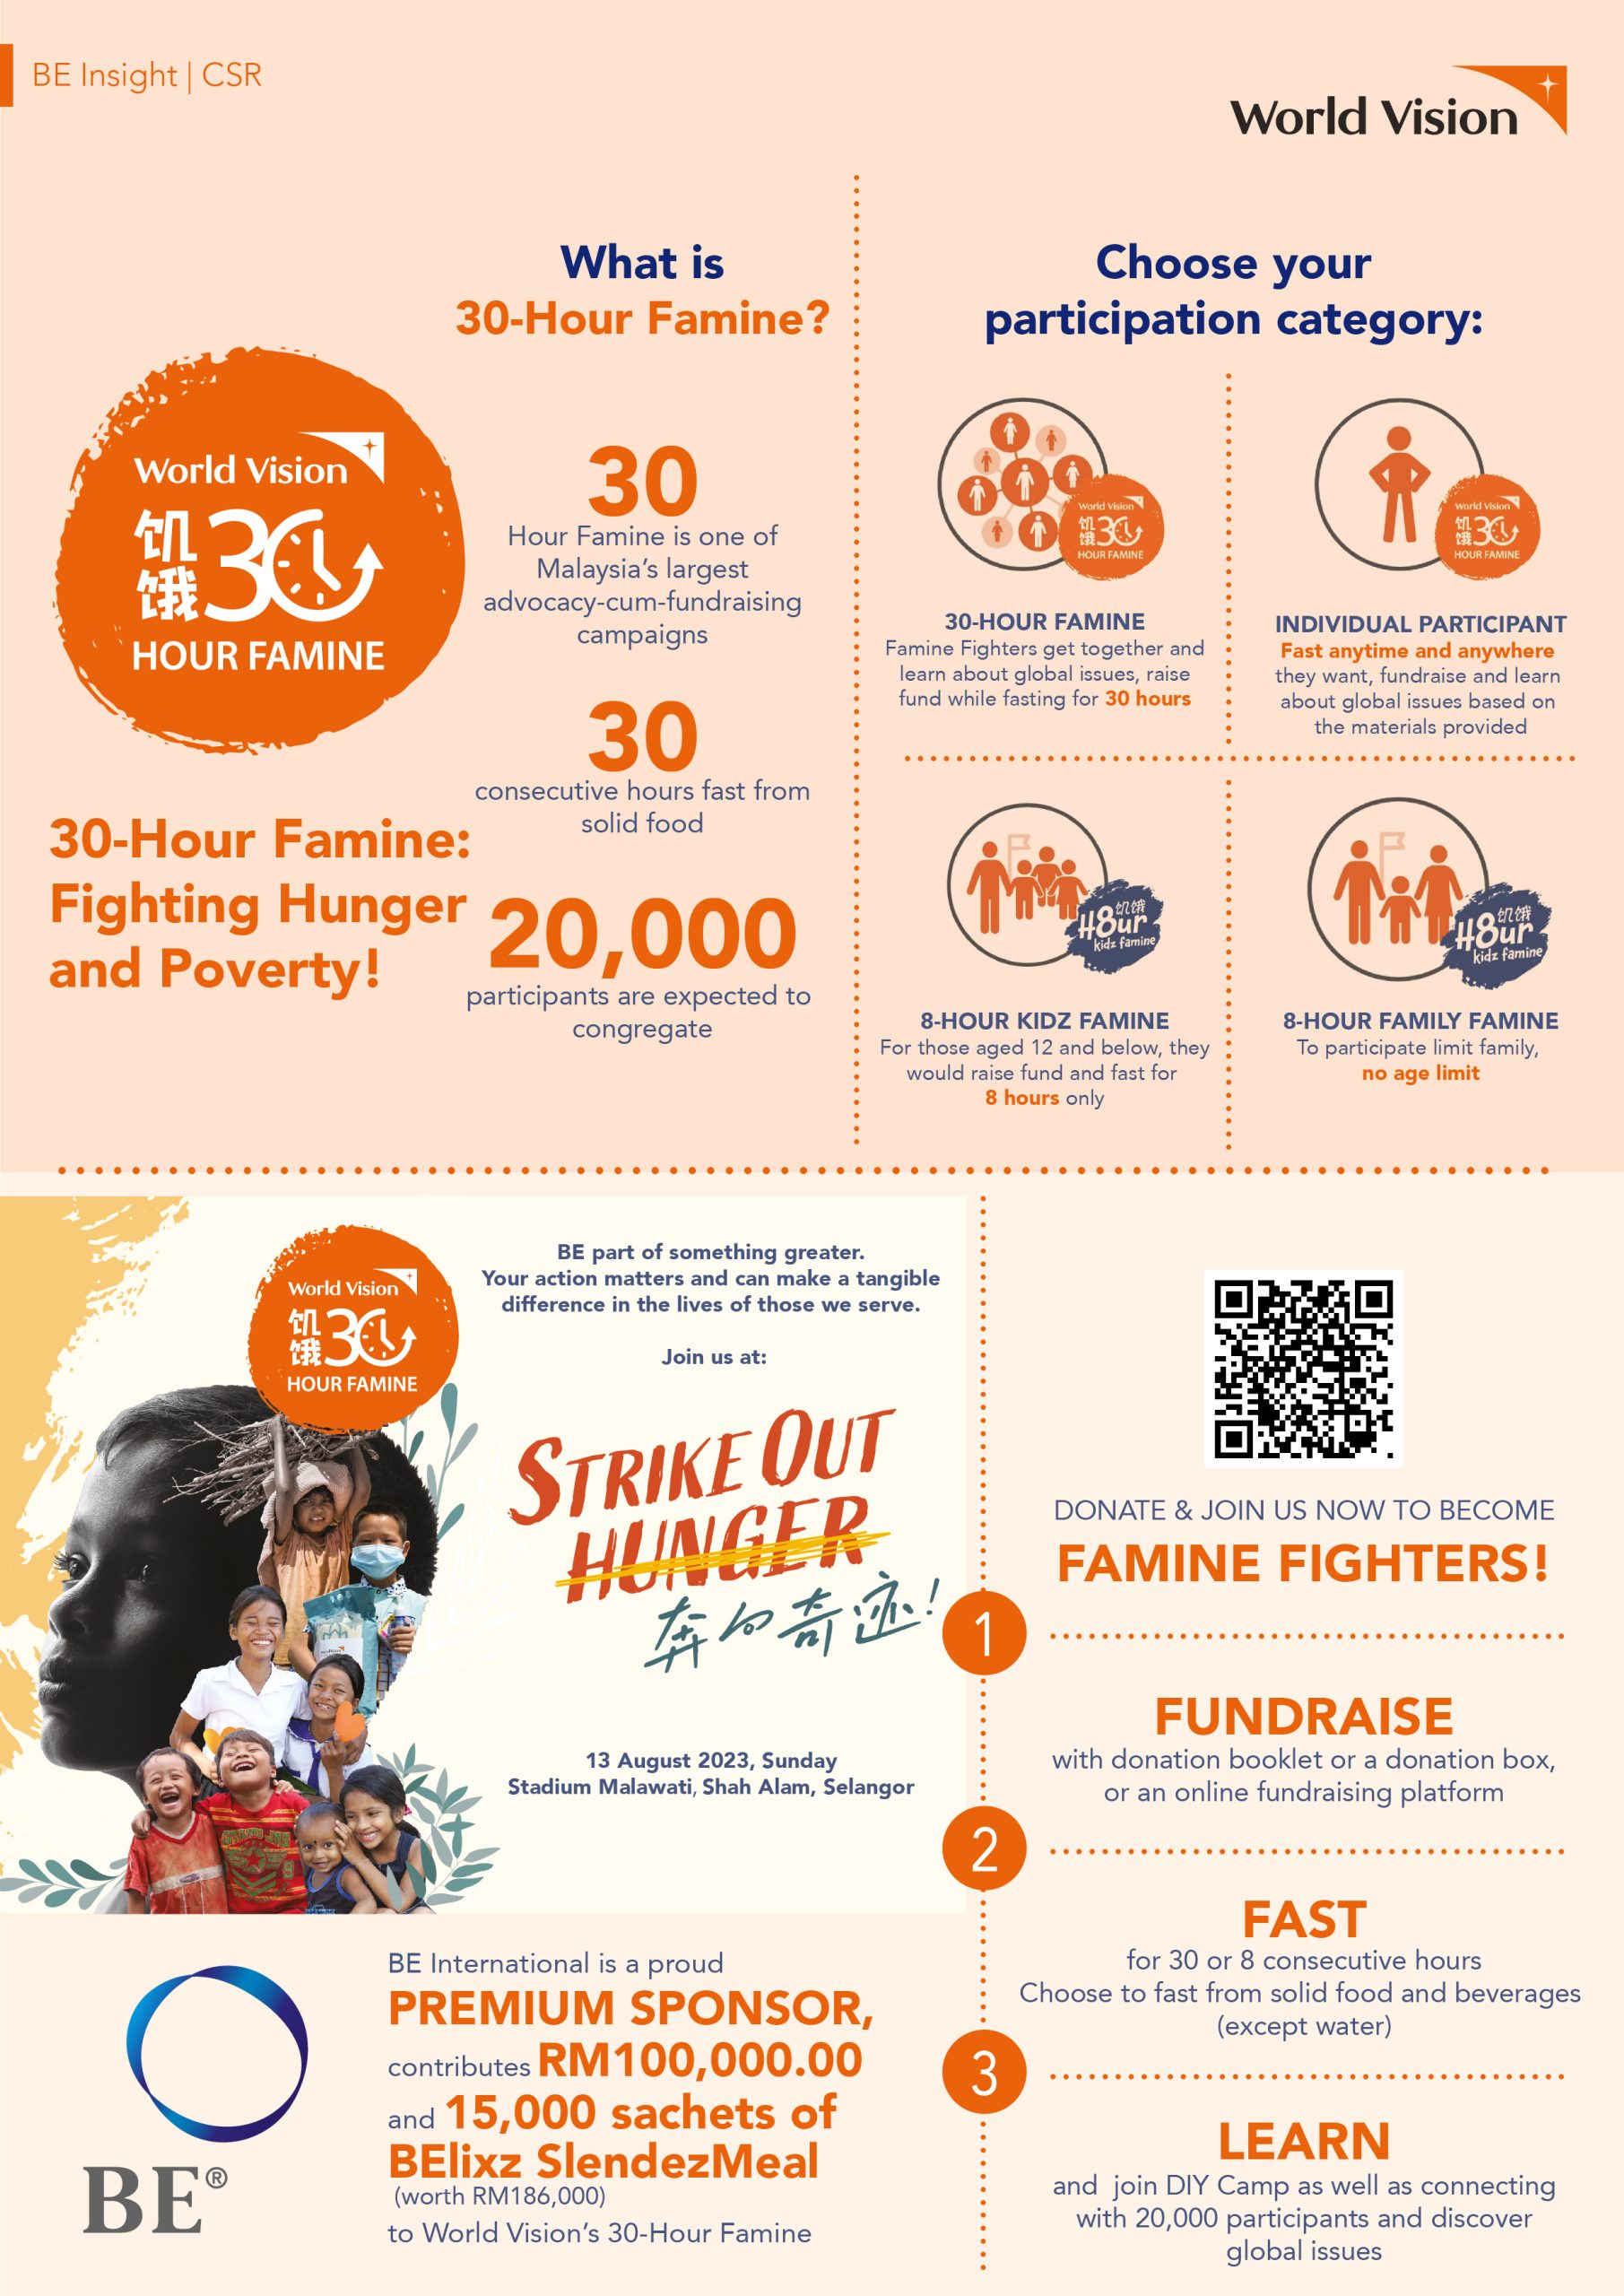 CSR 30Hour Famine Fighting Hunger and Poverty BE International